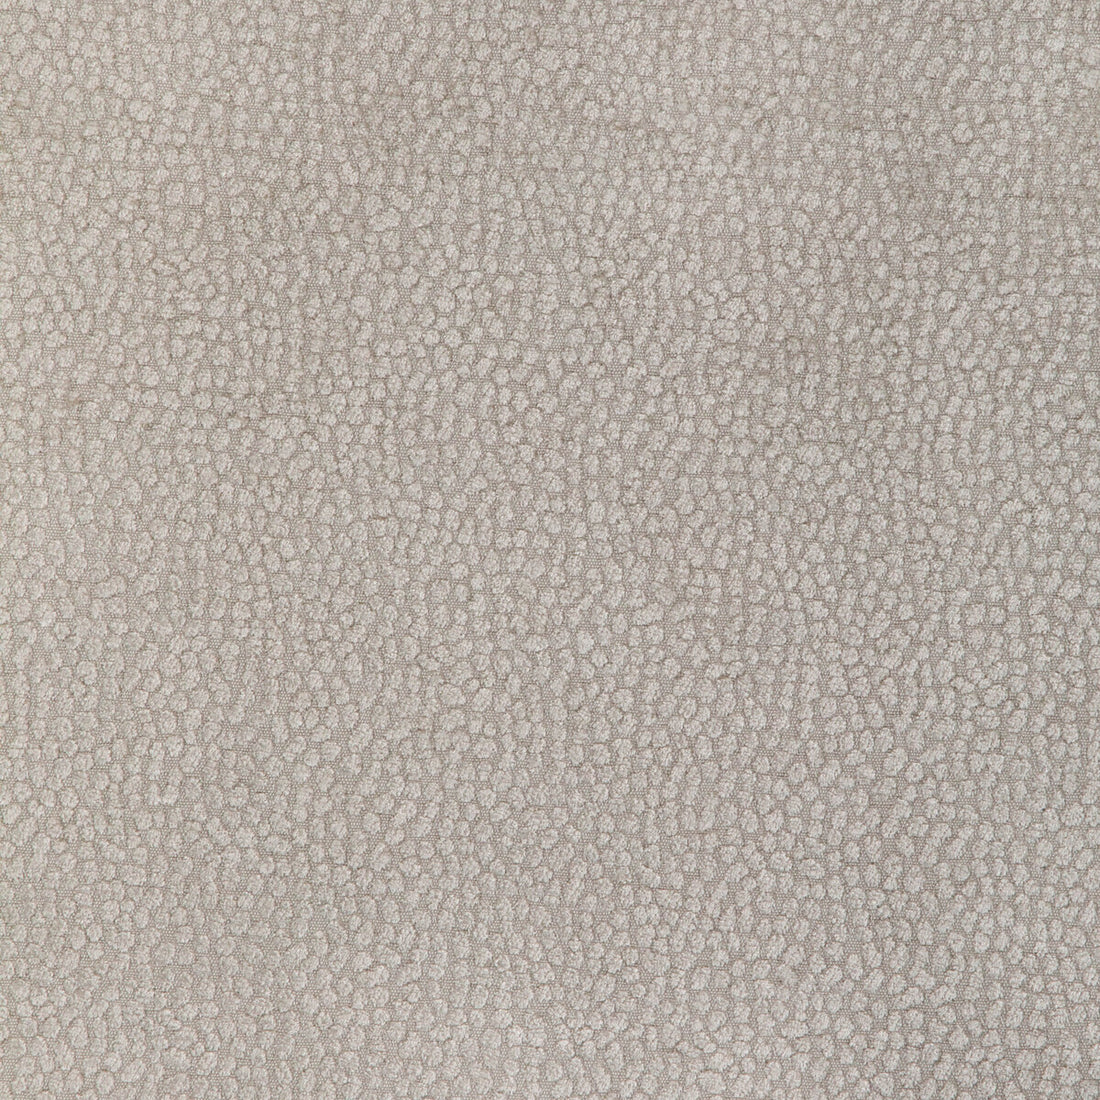 Pebble Chenille fabric in putty color - pattern 36812.11.0 - by Kravet Design in the Candice Olson collection